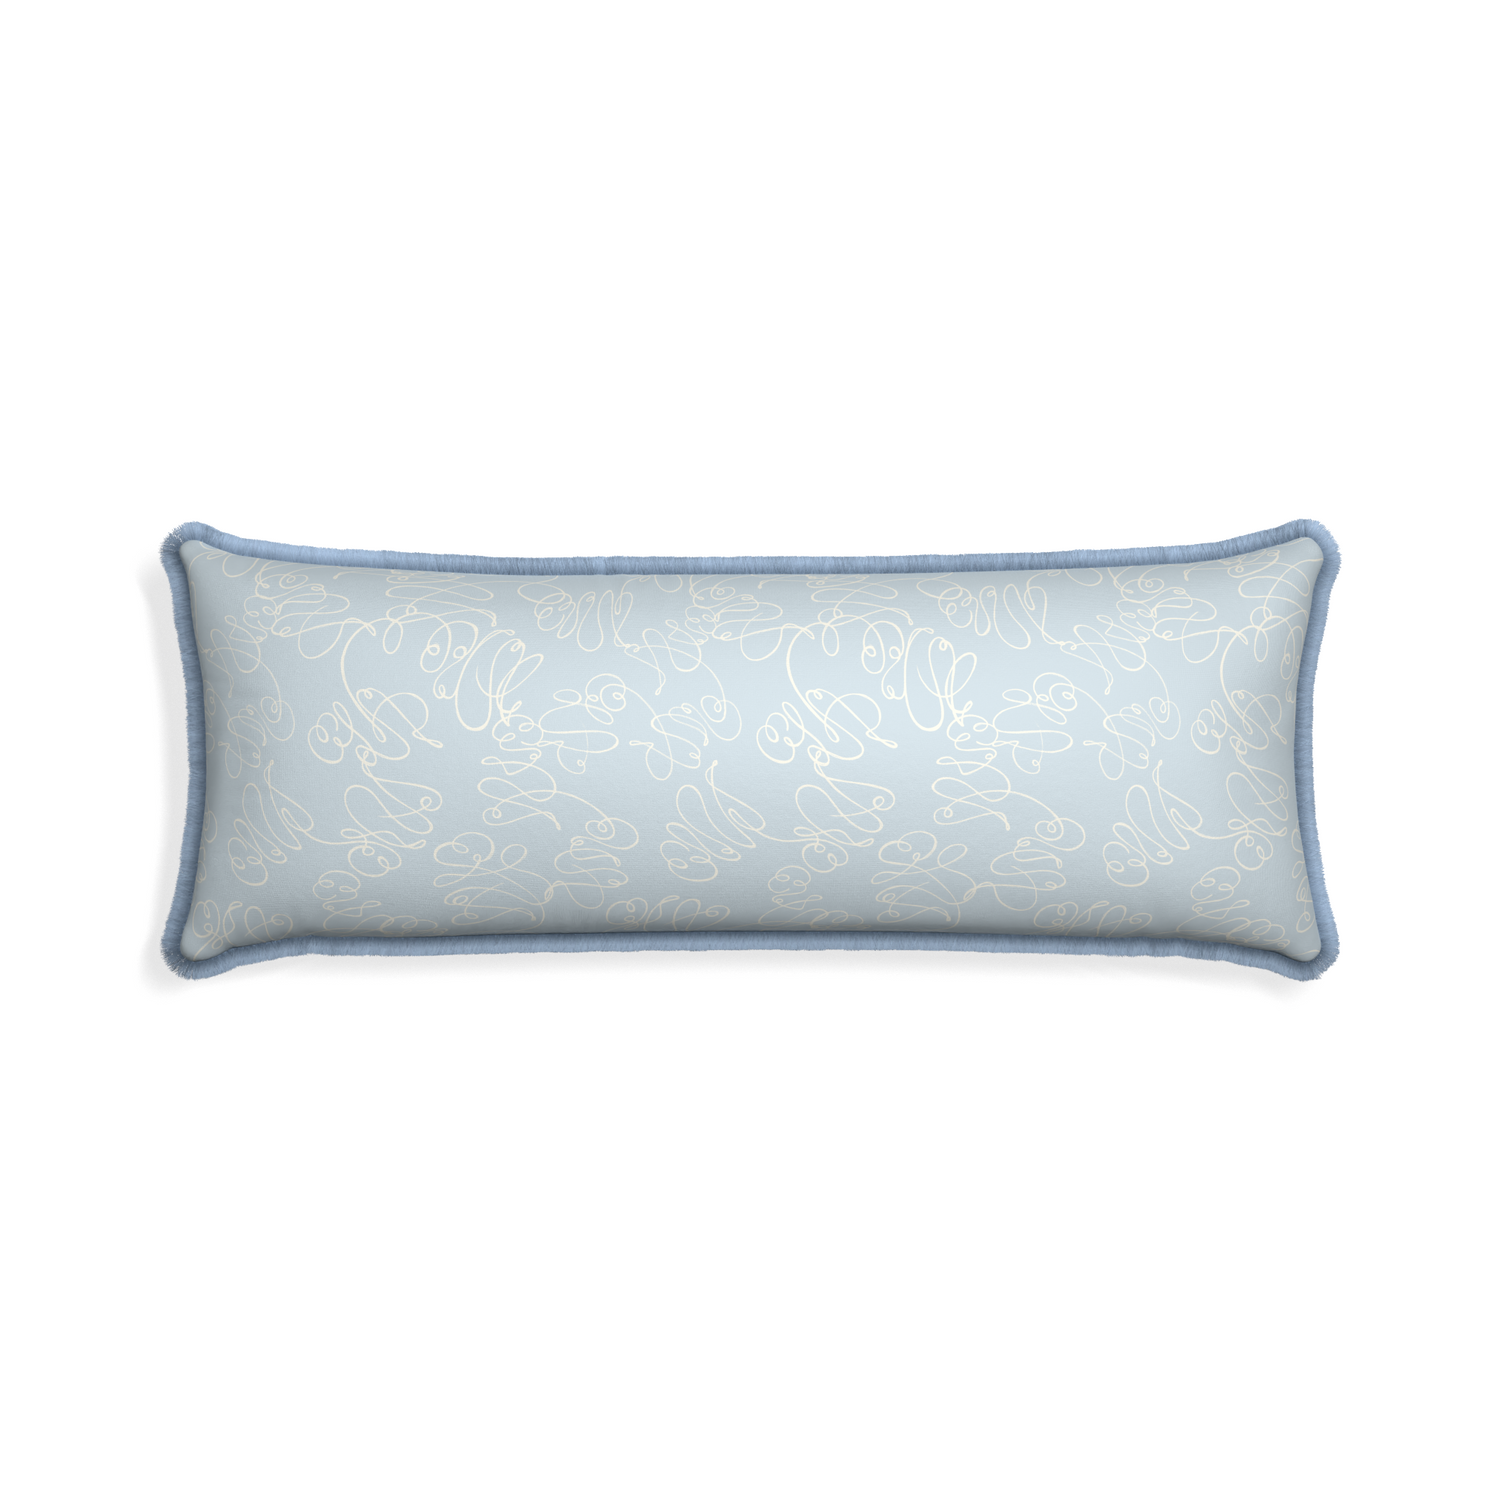 Xl-lumbar mirabella custom powder blue abstractpillow with sky fringe on white background